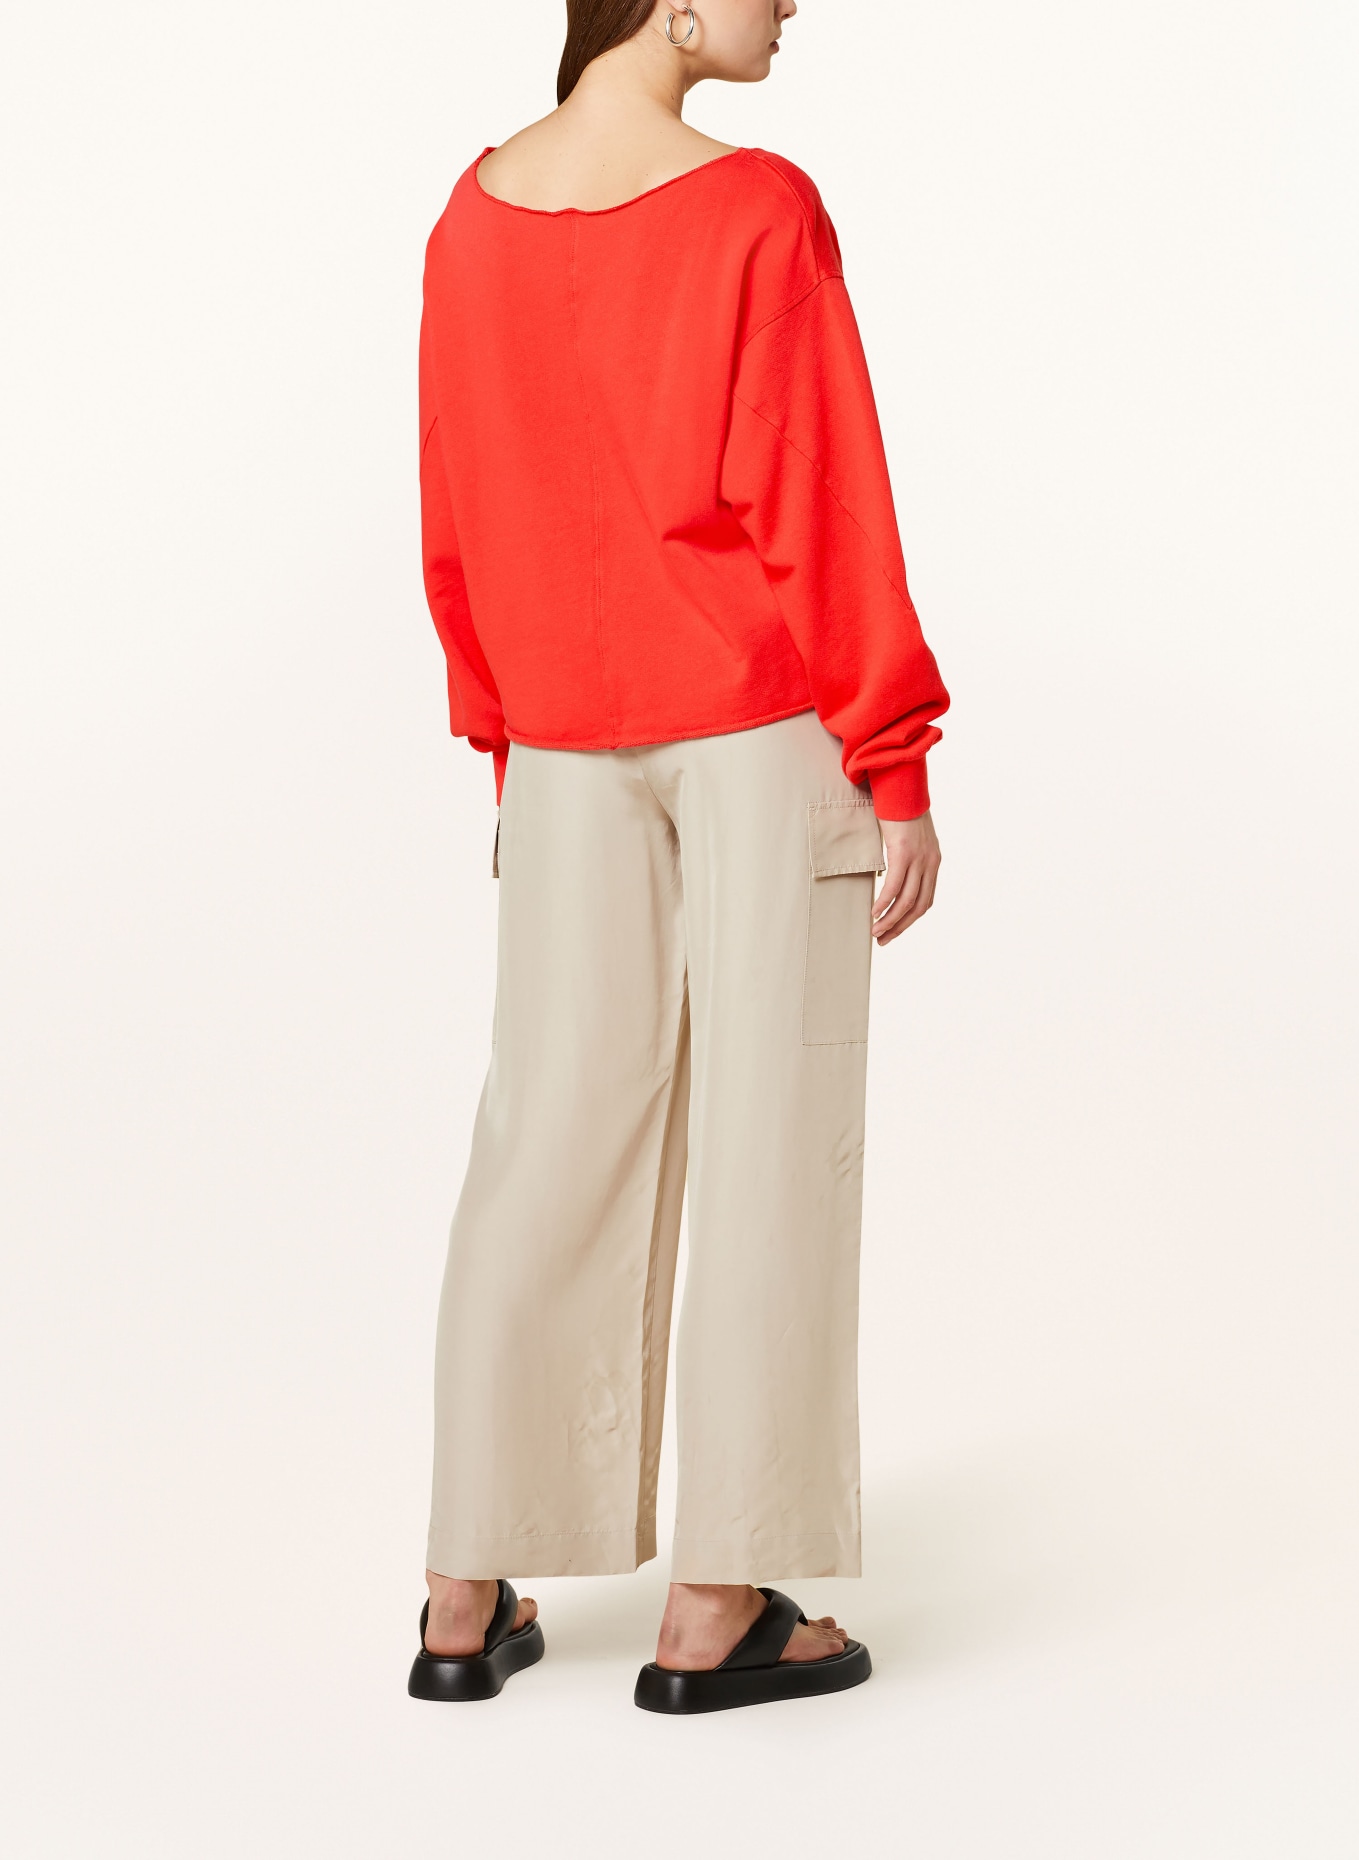 10DAYS Cropped sweatshirt, Color: RED (Image 3)